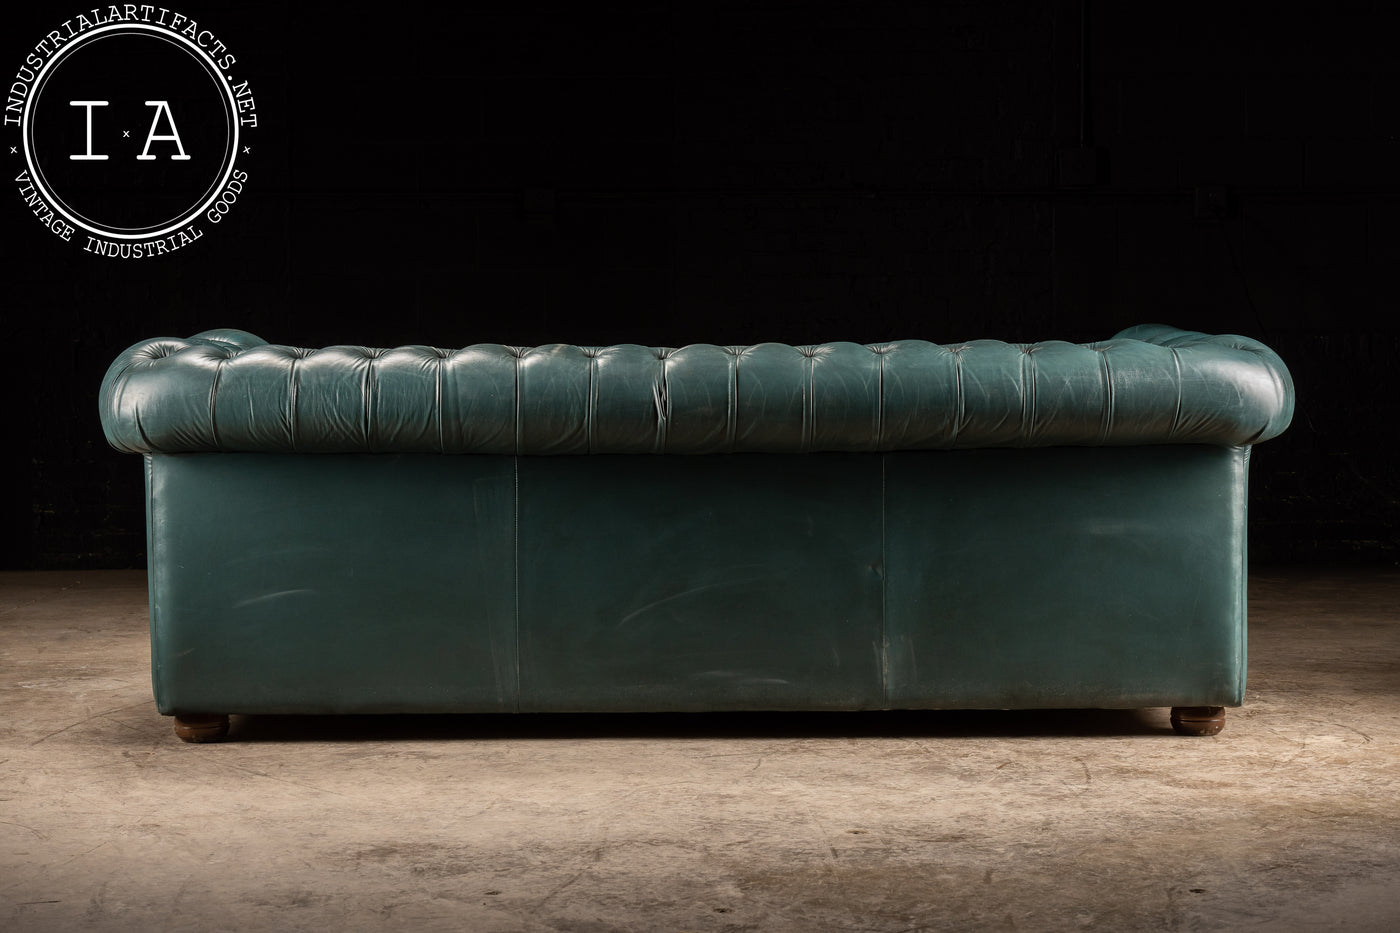 Vintage Tufted Leather Sofa in Blue Green